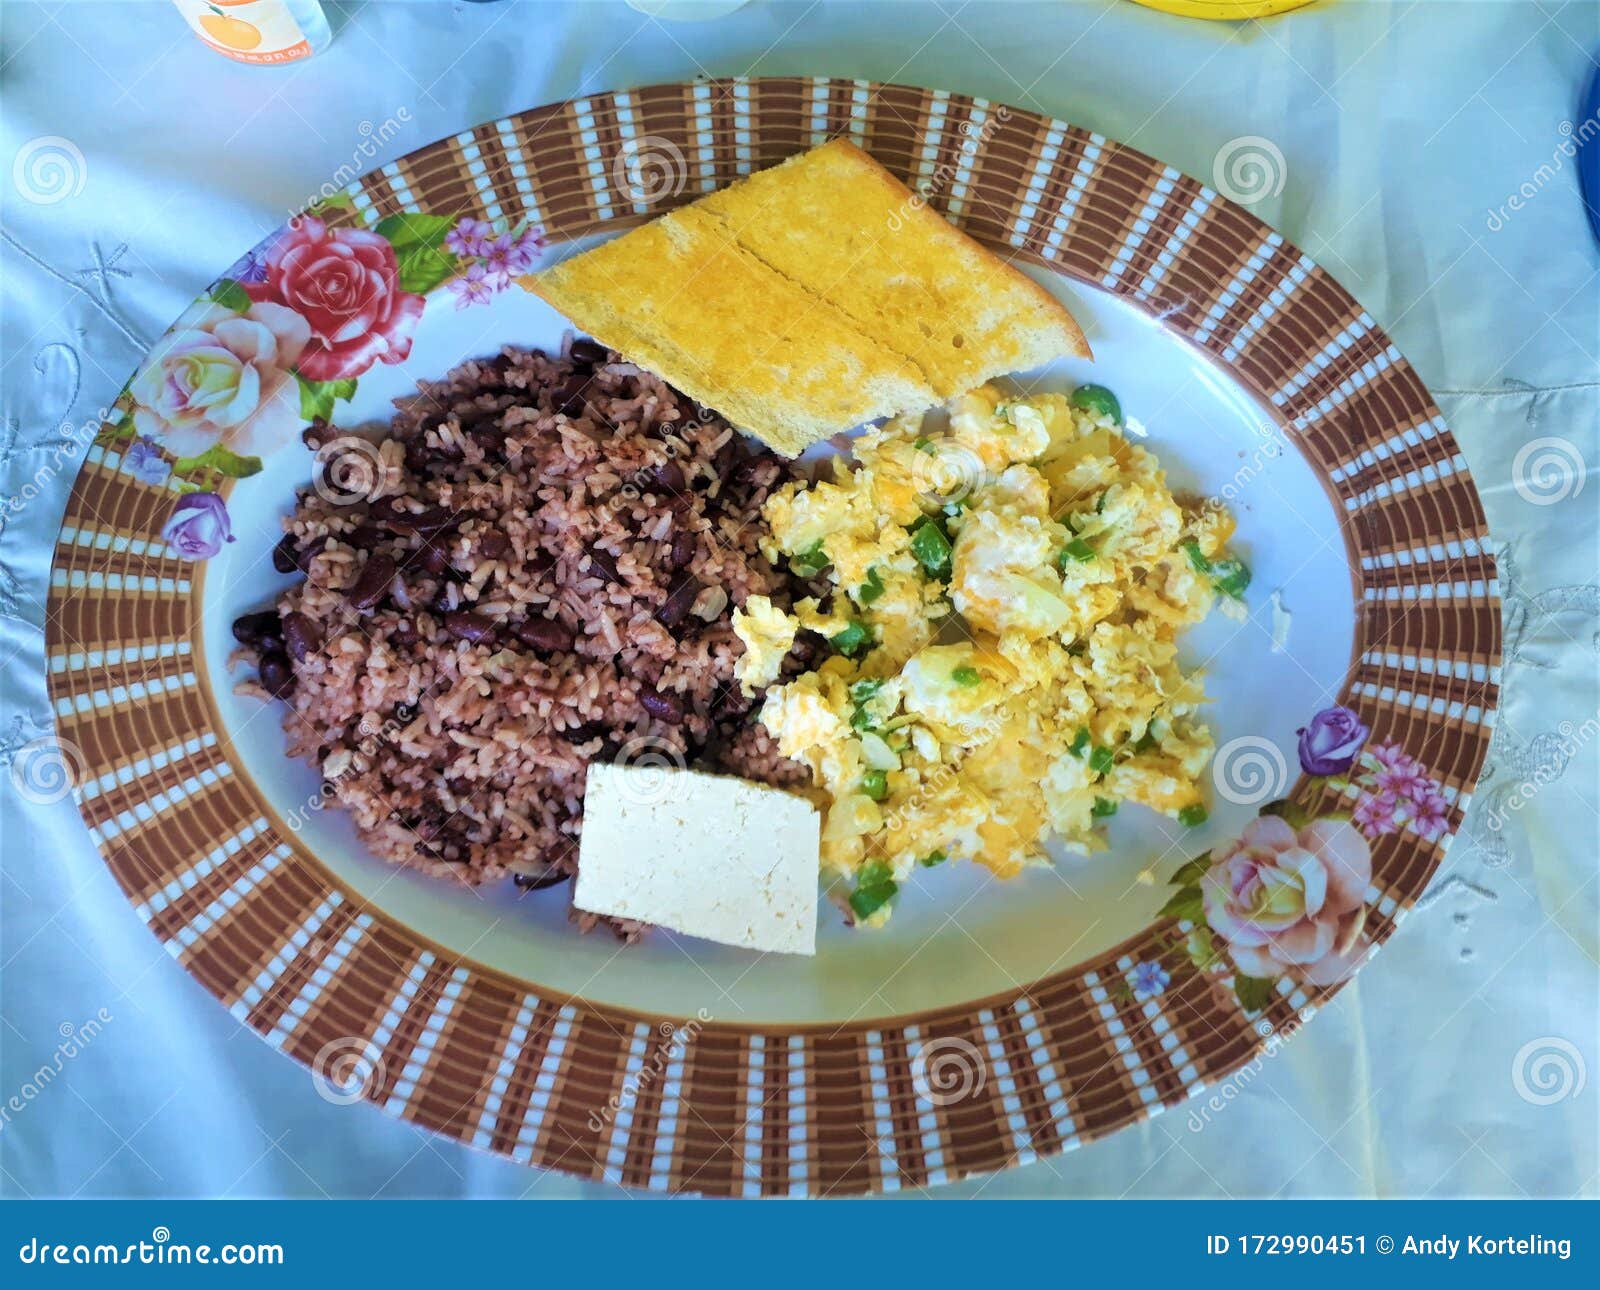 Rice and Beans for Breakfast in Nicaragua Ometepe Stock Image - Image ...